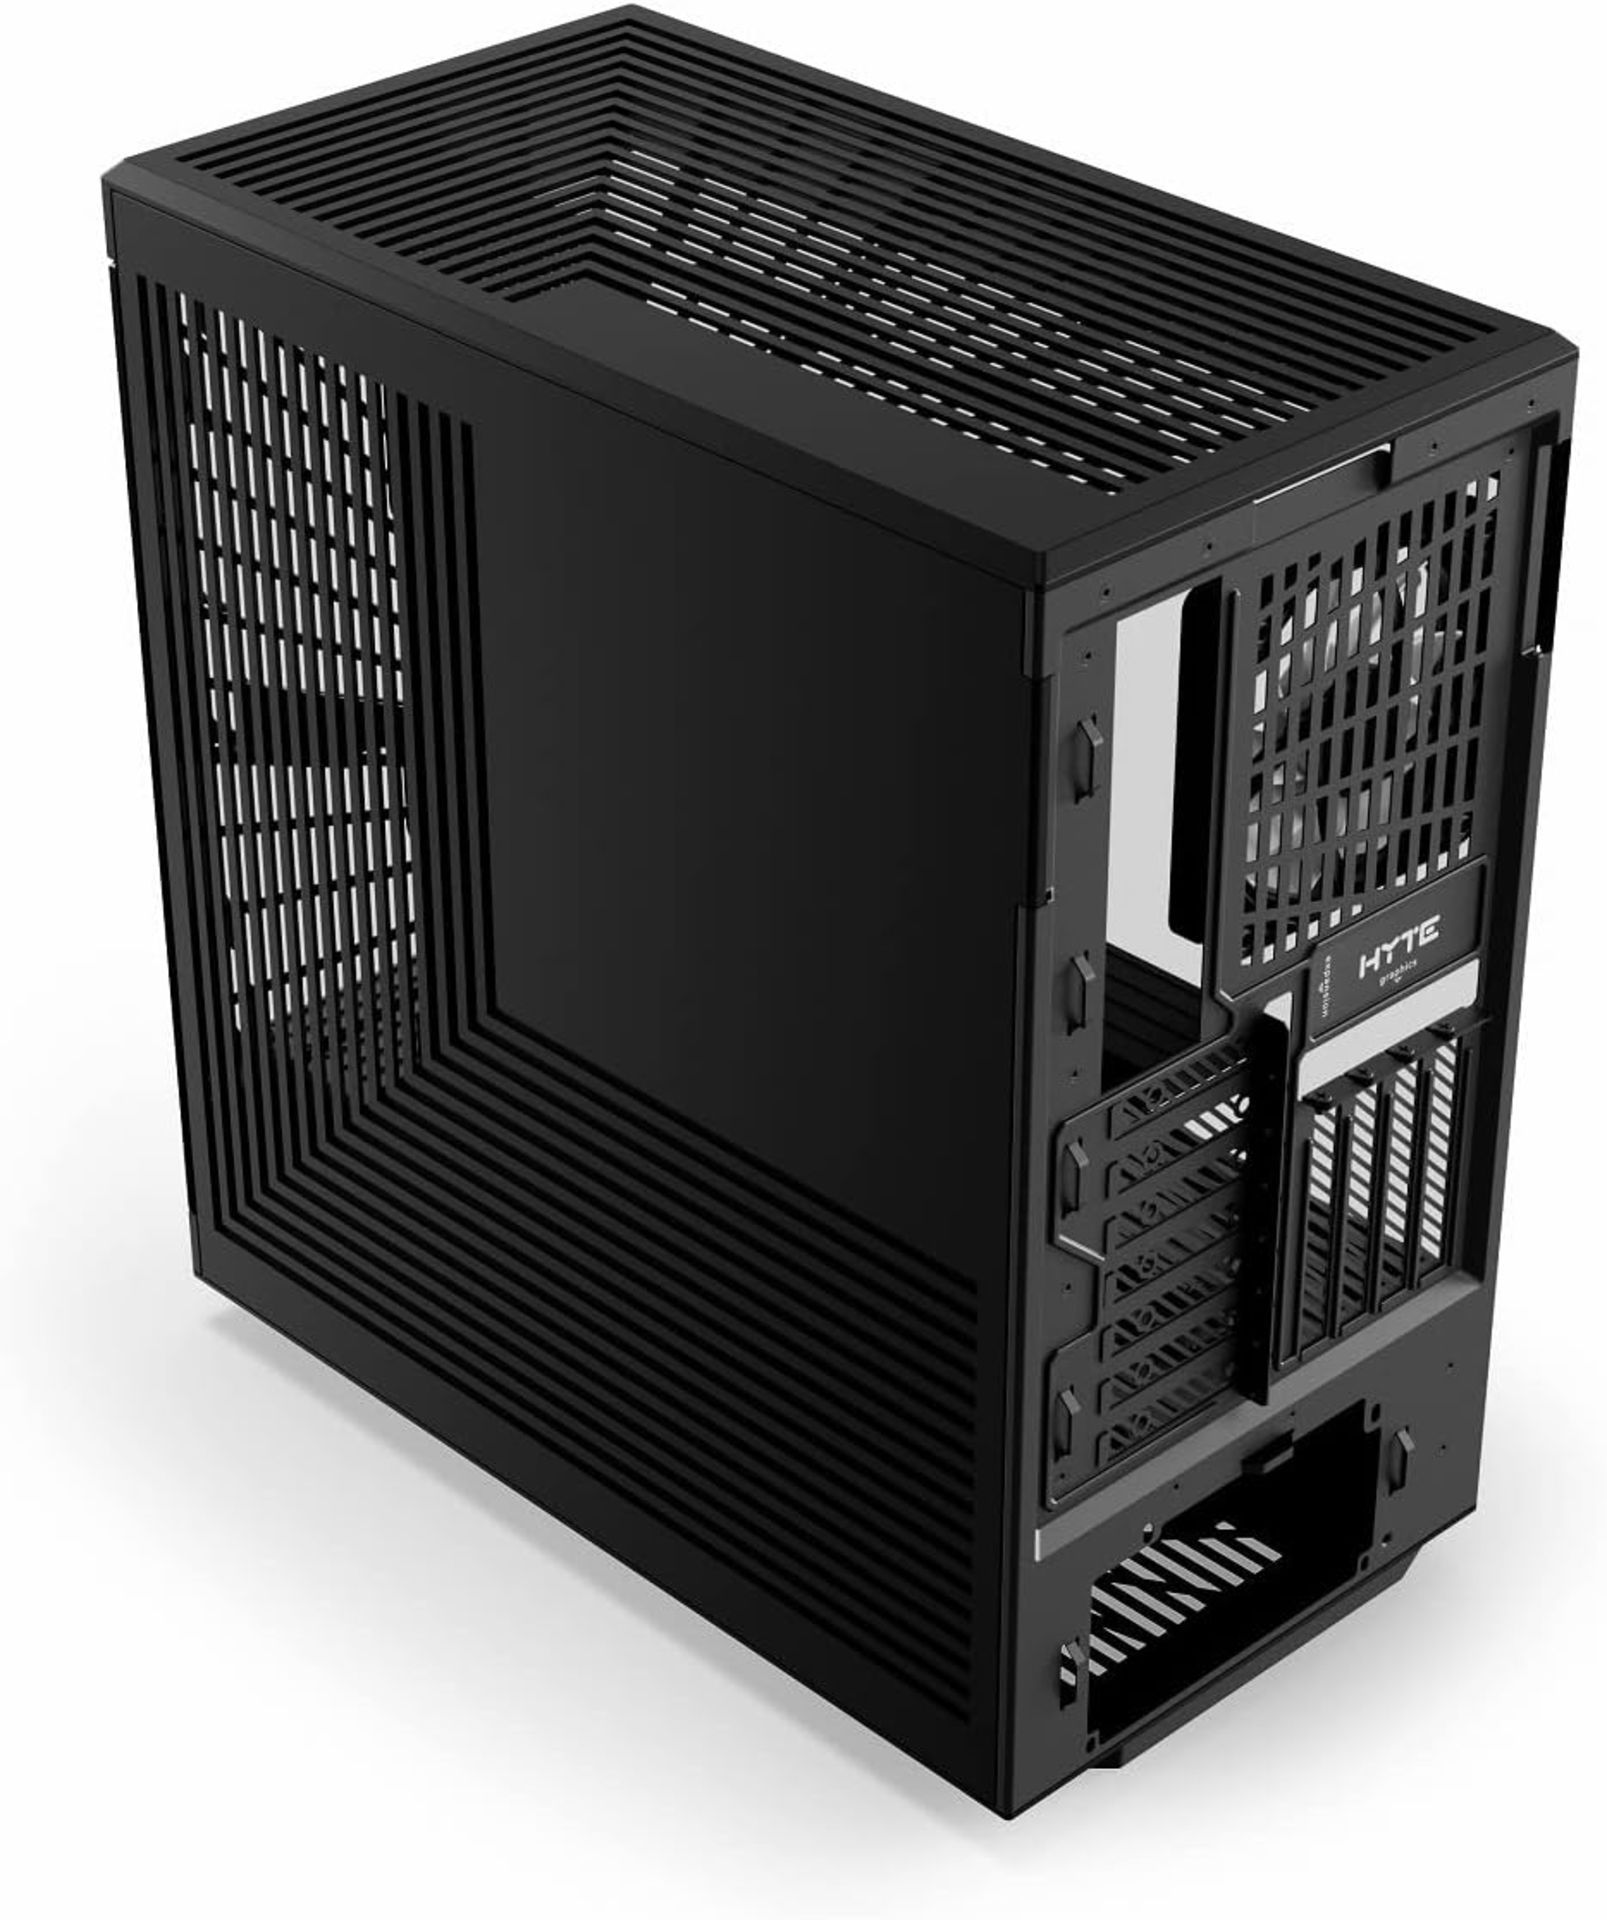 NEW & BOXED HYTE Y40 Mid-Tower ATX Case - Black. RRP £159.98. (R15R). The HYTE Y40 Mid-Tower ATX - Image 3 of 5